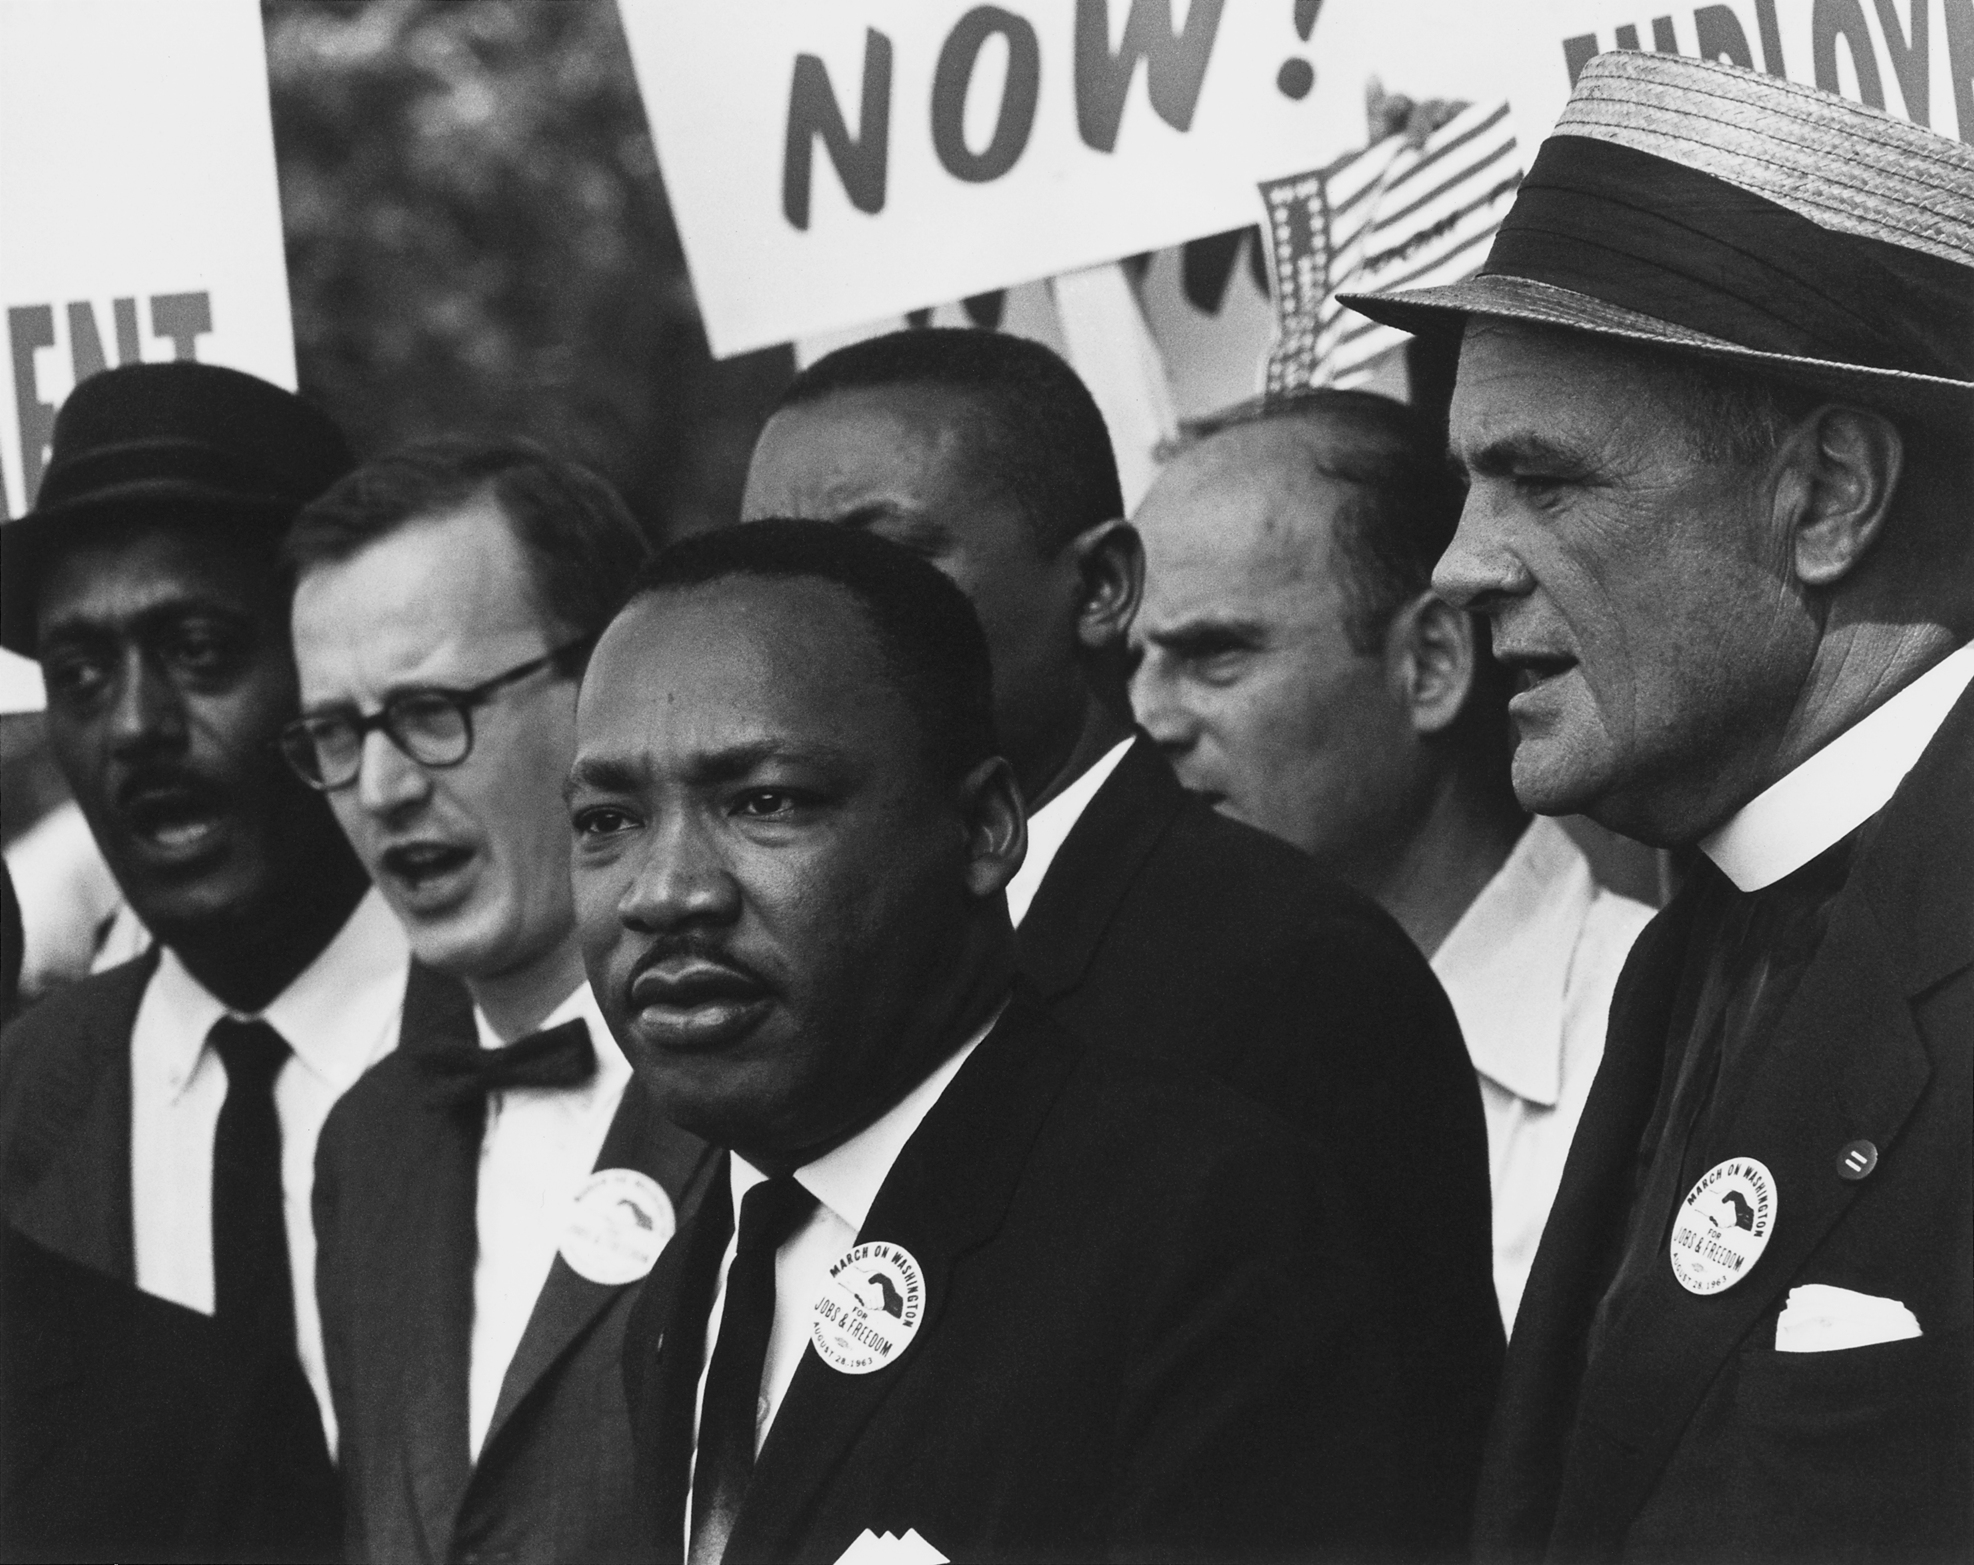 Image on Blog: 50 years after death - What can Rev. Dr. King teach us today?